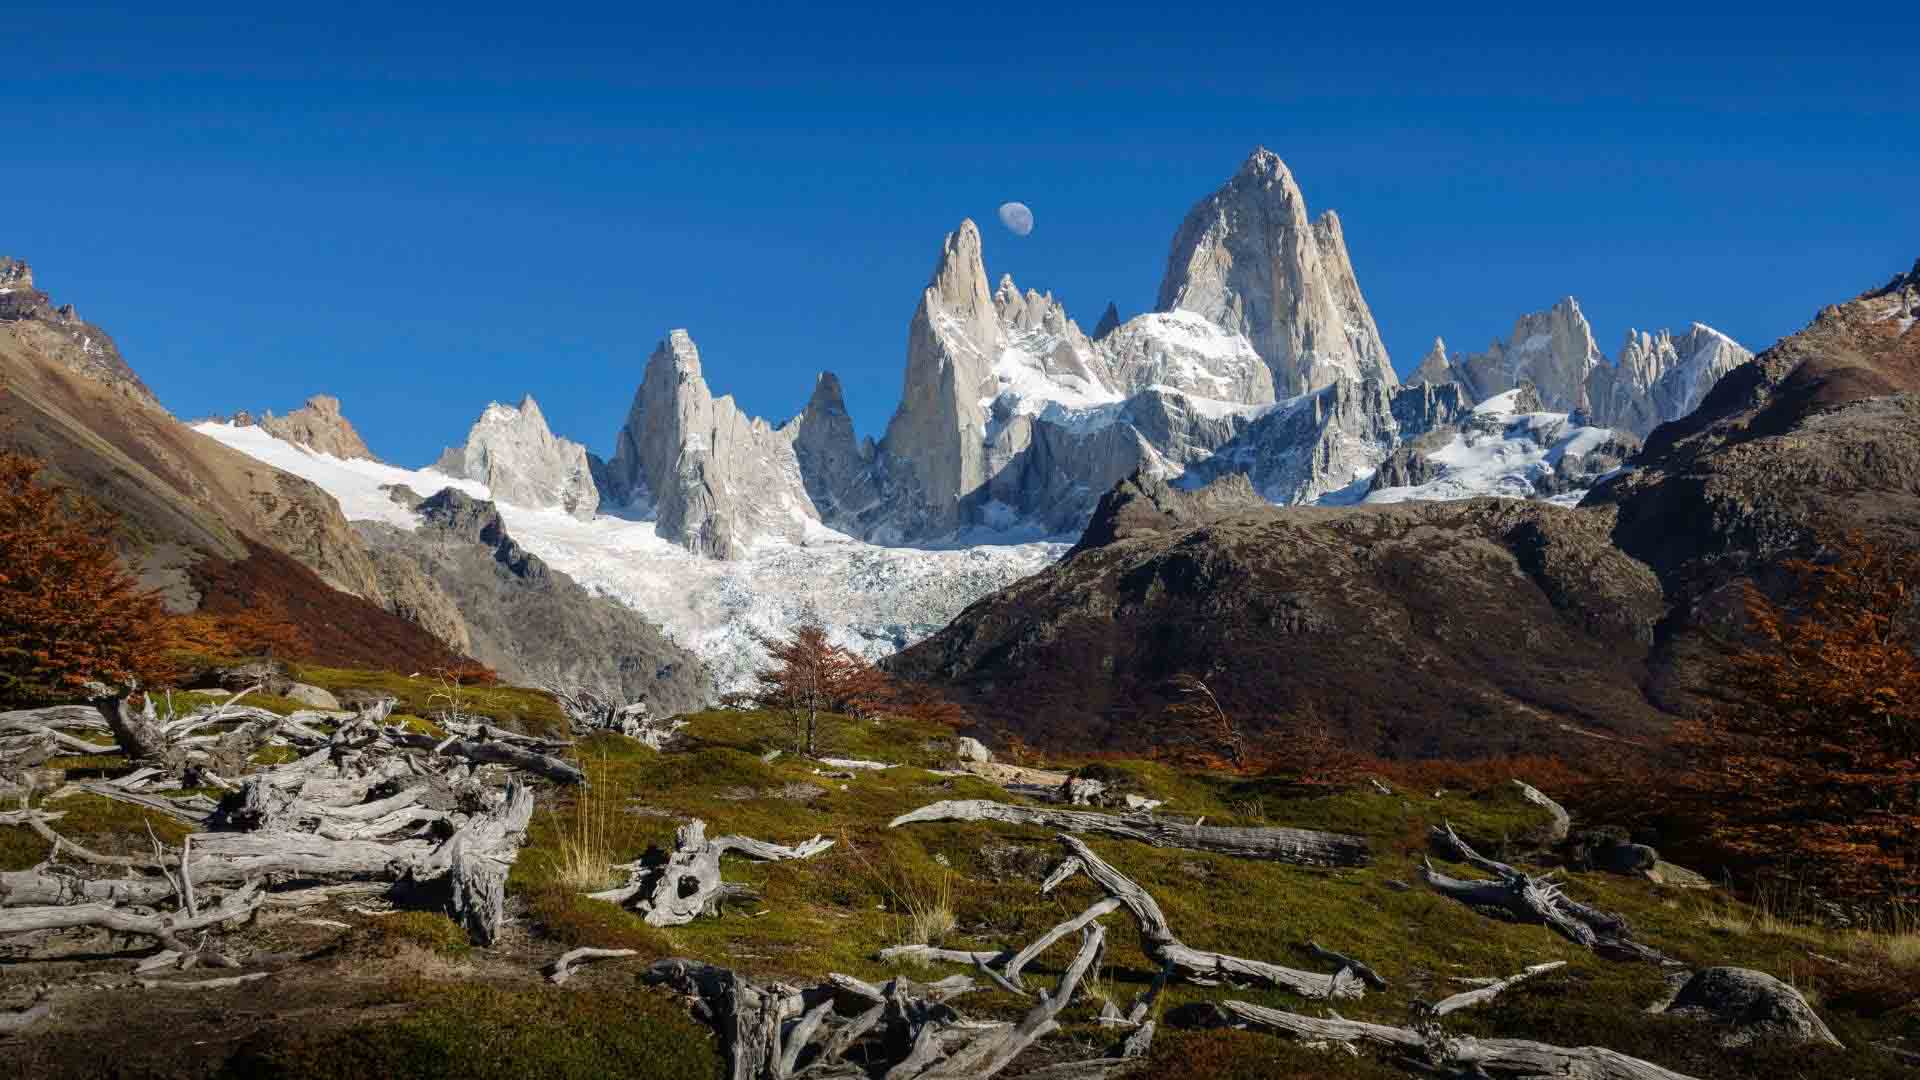  Argentina | 10 Things to Do in El Chalten